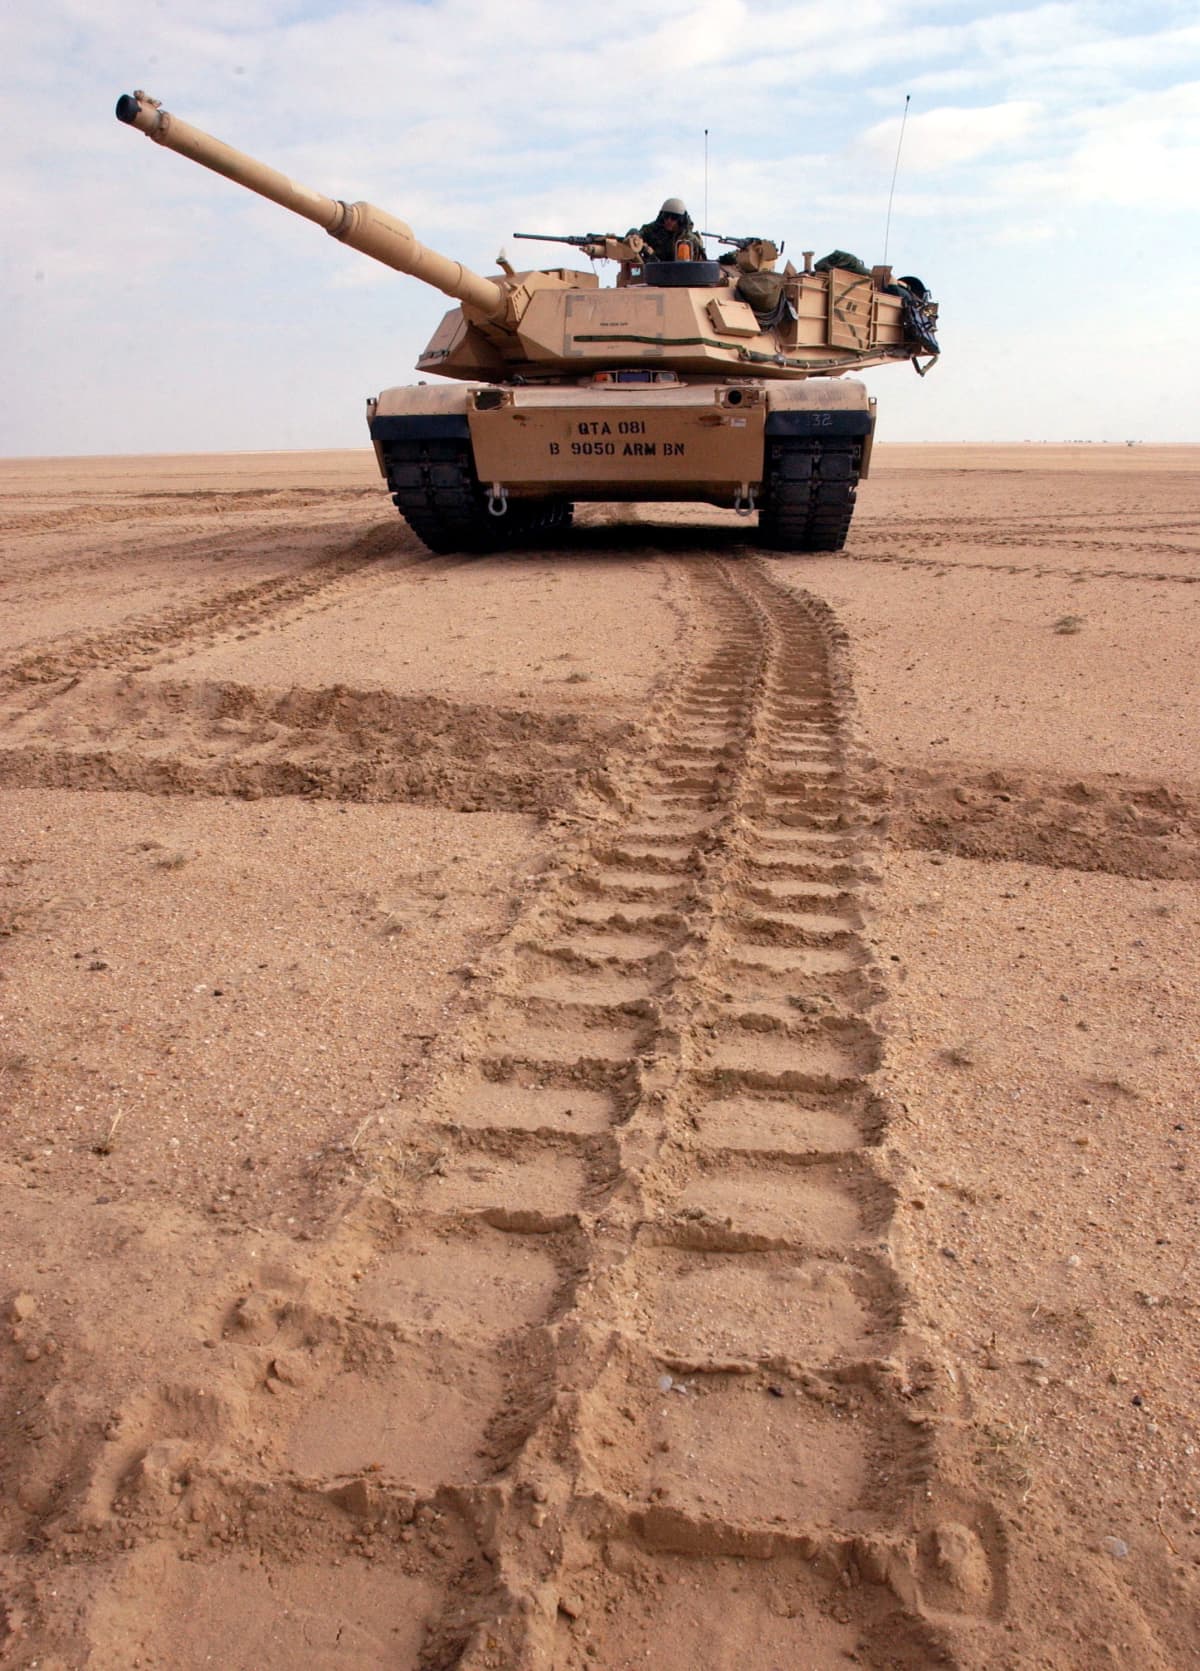 NEAR IRAQI BORDER IN KUWAIT - DECEMBER 18:  A U.S. Army M1/A1 Abrams tank from Charlie company of the 464 Armored Battalion changes position during task force manuevers December 18, 2002 near the Iraqi border in the Kuwaiti. The U.S. military continues to train throughout the gulf region in case of possible deployment to Iraq.  (Photo by Scott Nelson/Getty Images)